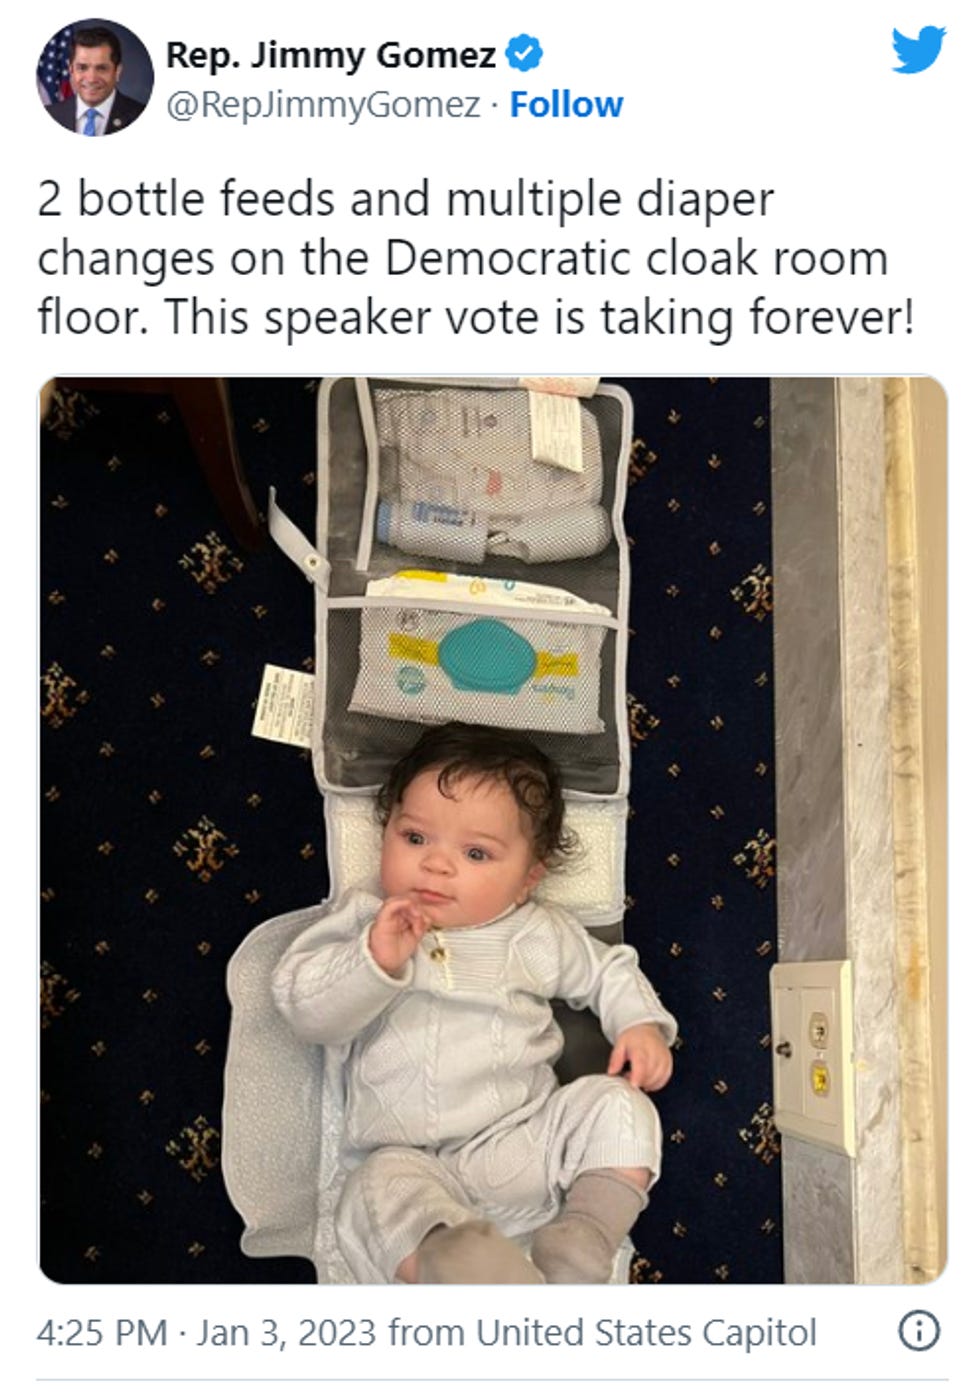 Jimmy Gomez tweet: Two bottle feeds and multiple changes on the Democratic cloak room floor. This speaker vote is taking forever! 